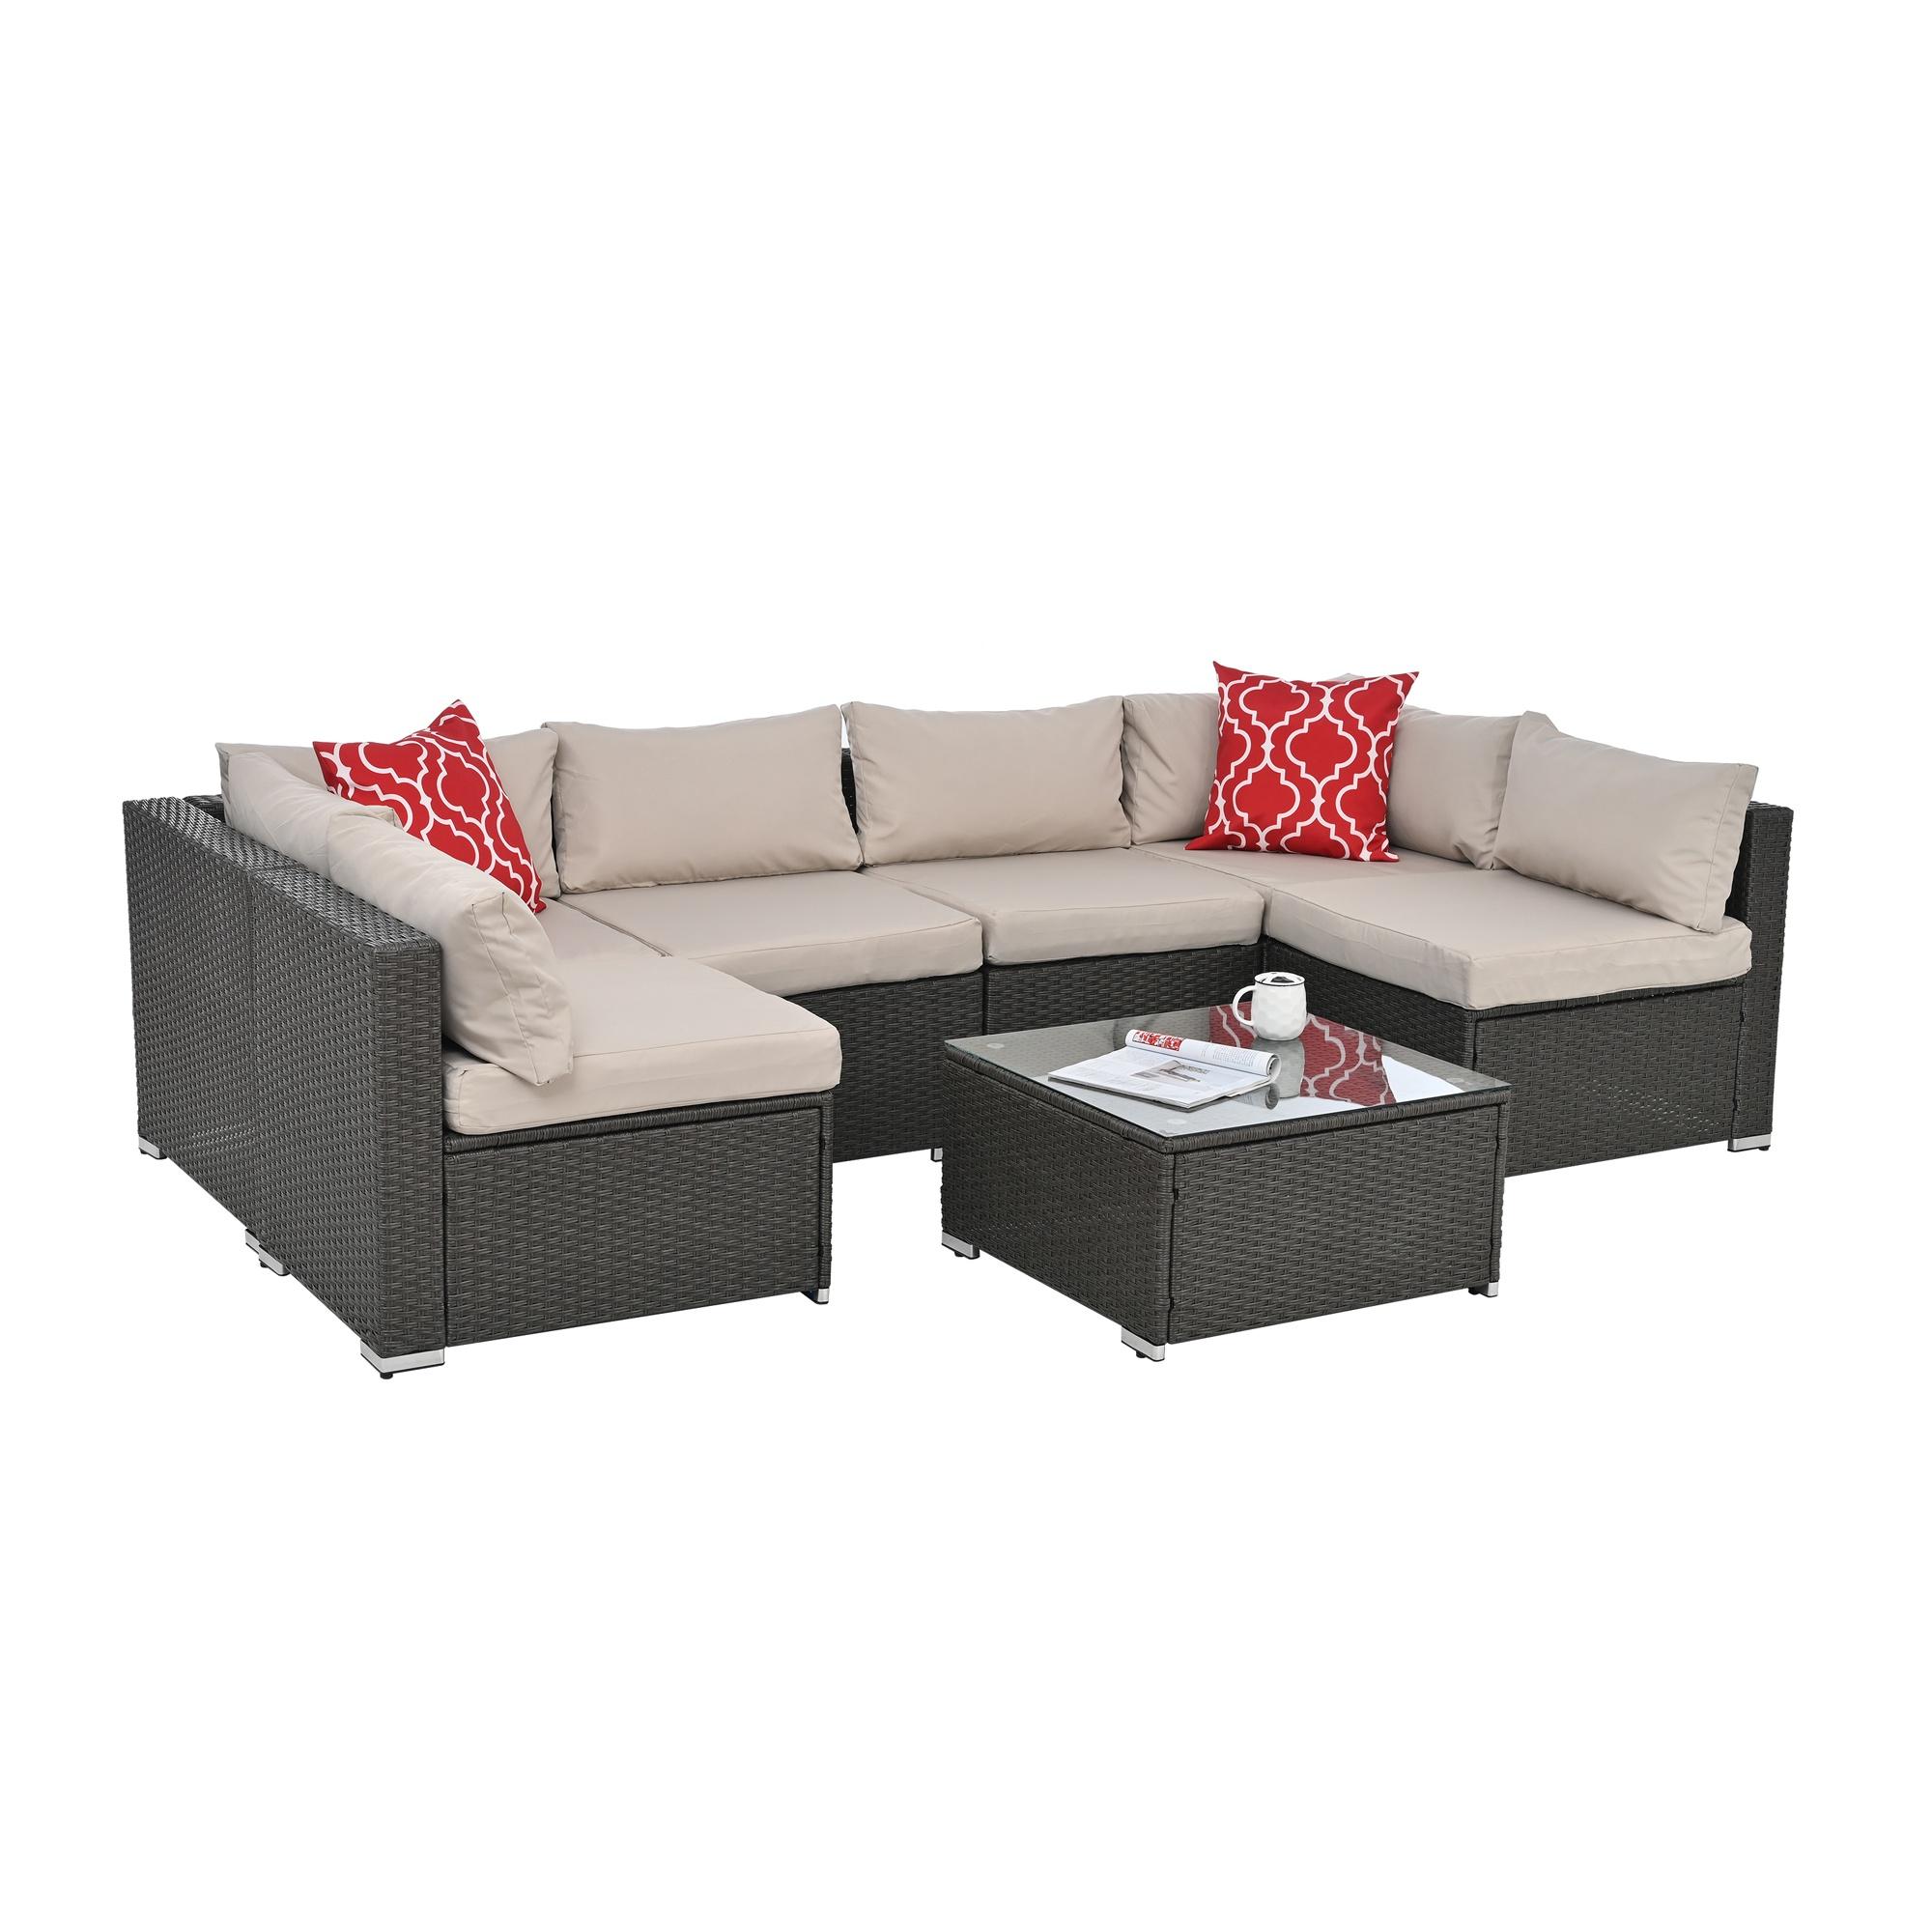 Wicker Patio Sofa Sets, 7 Pieces Outdoor Seating Sets, Lounge Sofa and Tempered Glass Coffee Table, Deck Front Garden Furniture Set, Gray Rattan + Beige Cushion - image 5 of 10